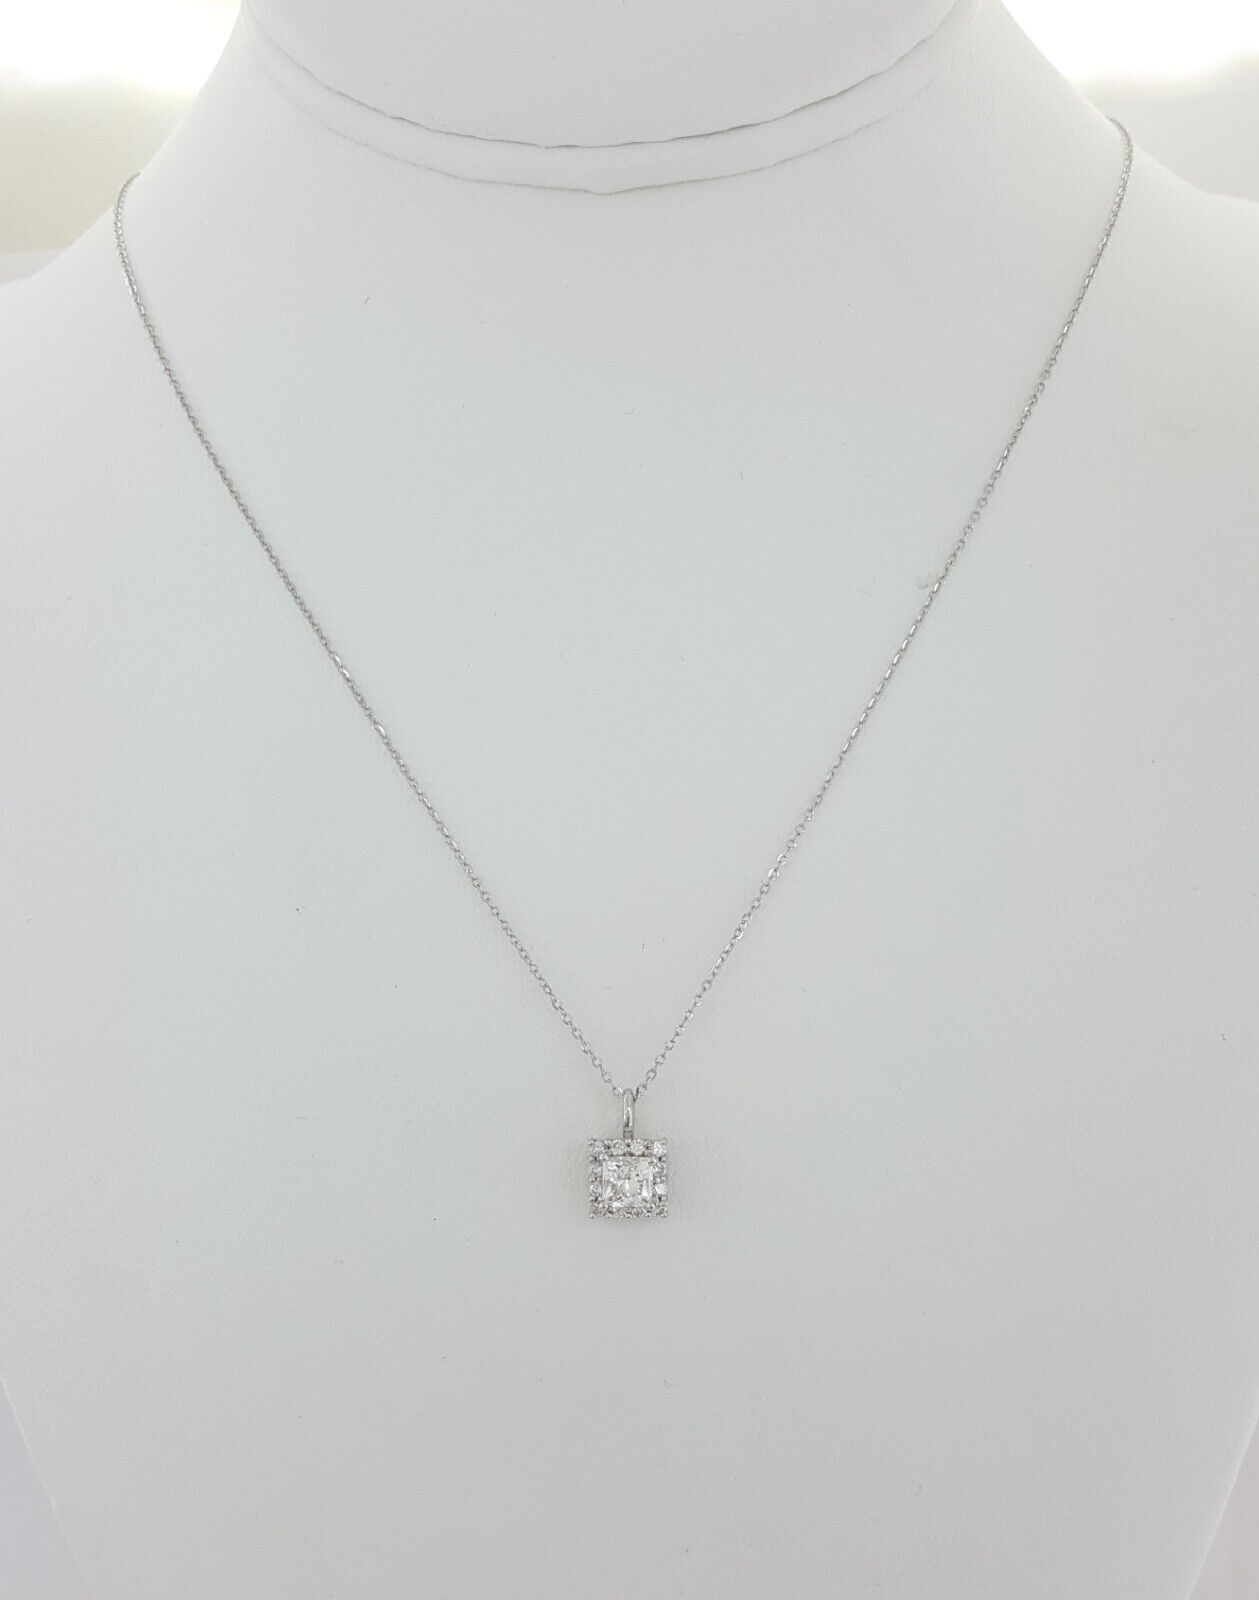 1.01 ct Total Weight Princess Brilliant Cut Diamond Halo Pendant Necklace, crafted in elegant 14K white gold—a timeless piece designed to adorn you with grace and sophistication.

This exquisite pendant, accompanied by an adjustable 16-18-inch